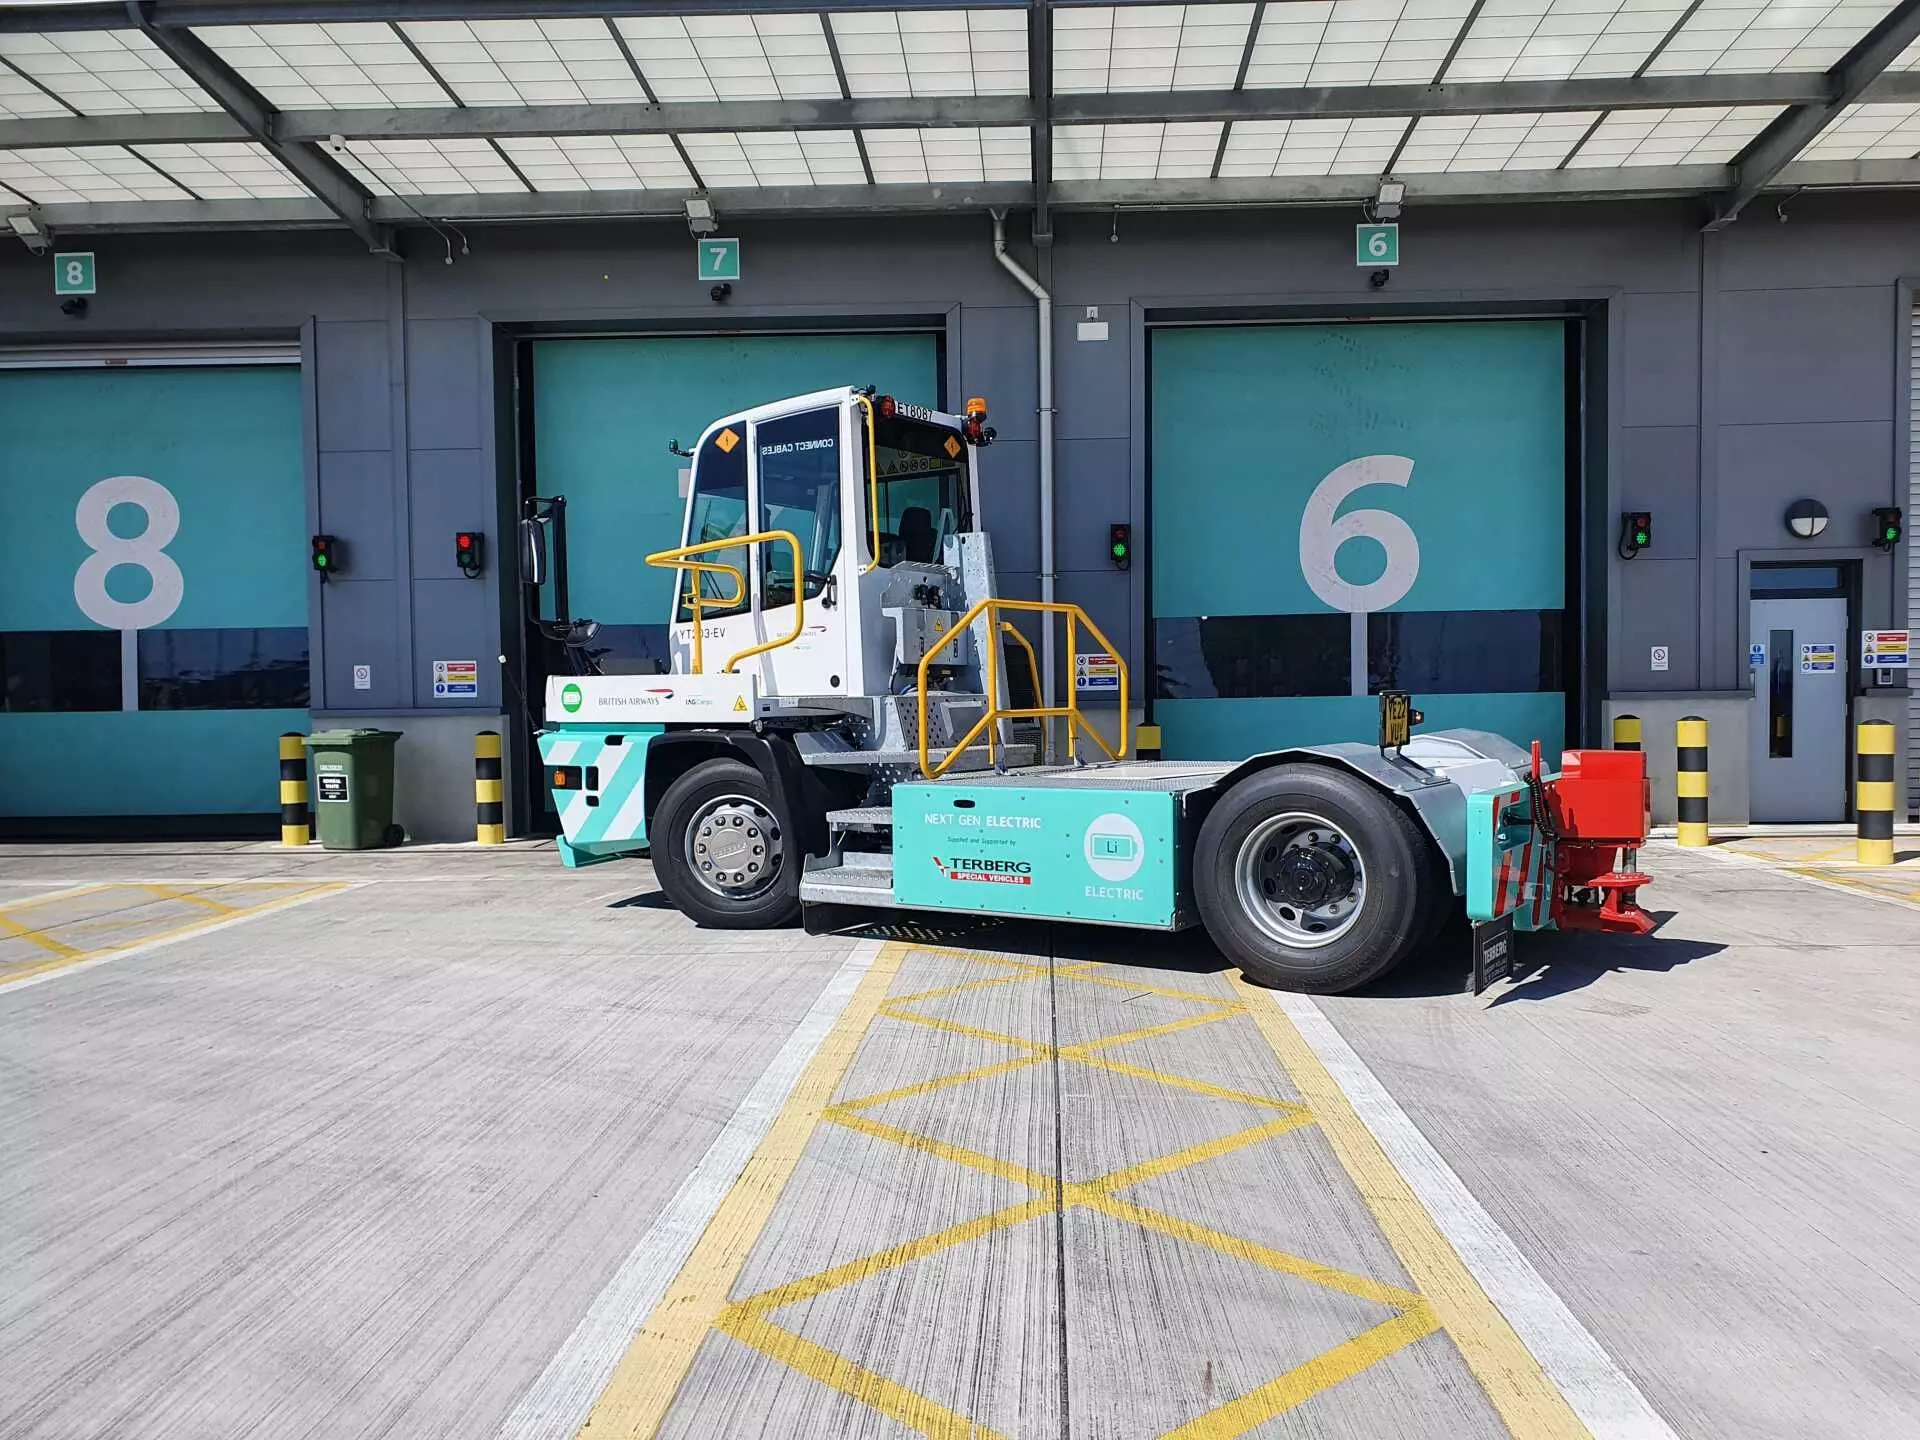 IAG Cargo trials first electric terminal tractor at London Heathrow airport